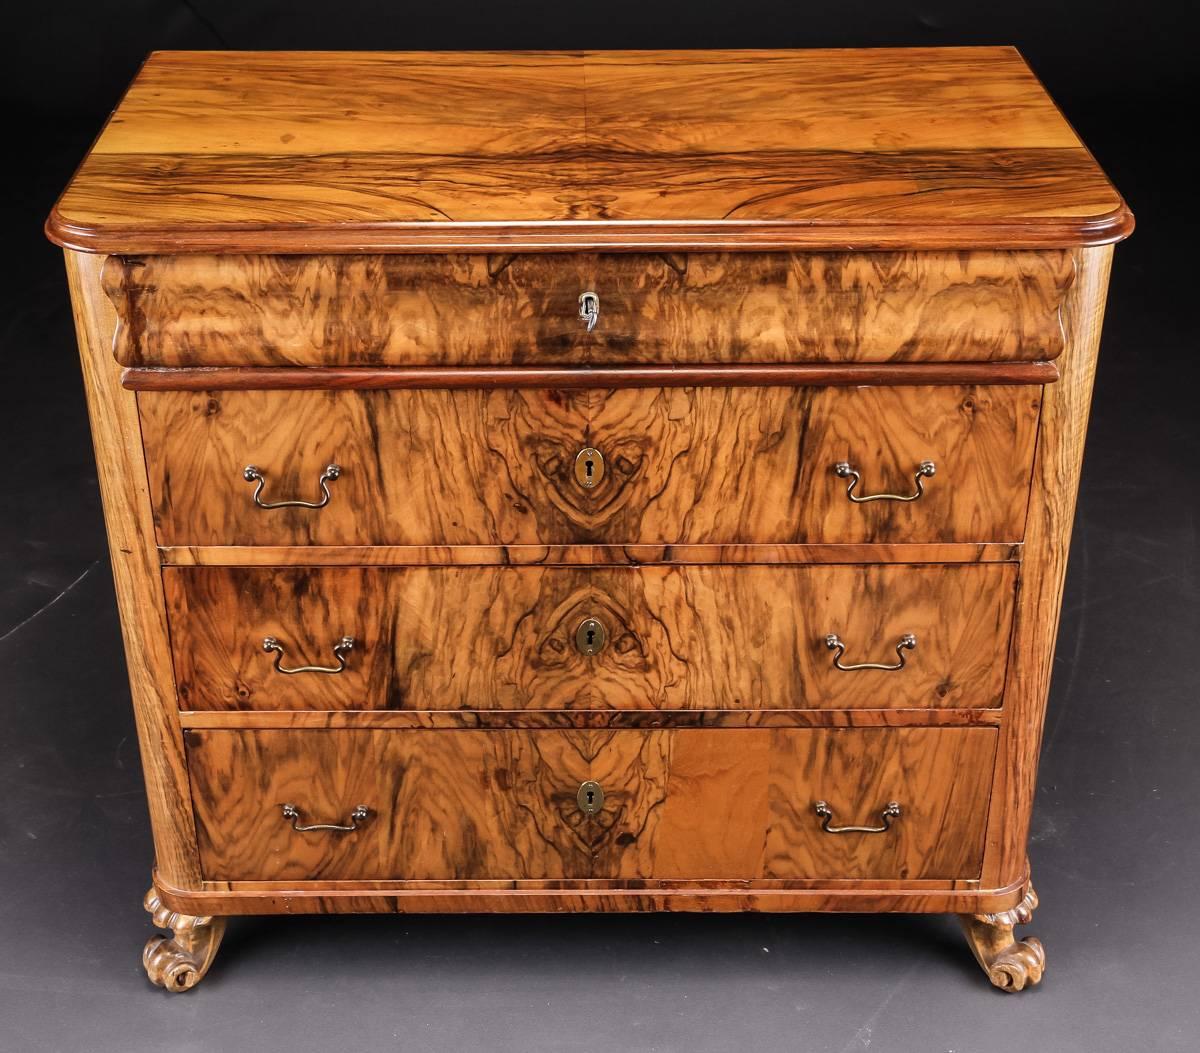 A Danish good quality 19th century small-scale chest of drawers. The chest fitted with one narrow drawer over three full-sized drawers. The chest raised on plume carved scrolled front feet. A good apartment sized chest of drawers.